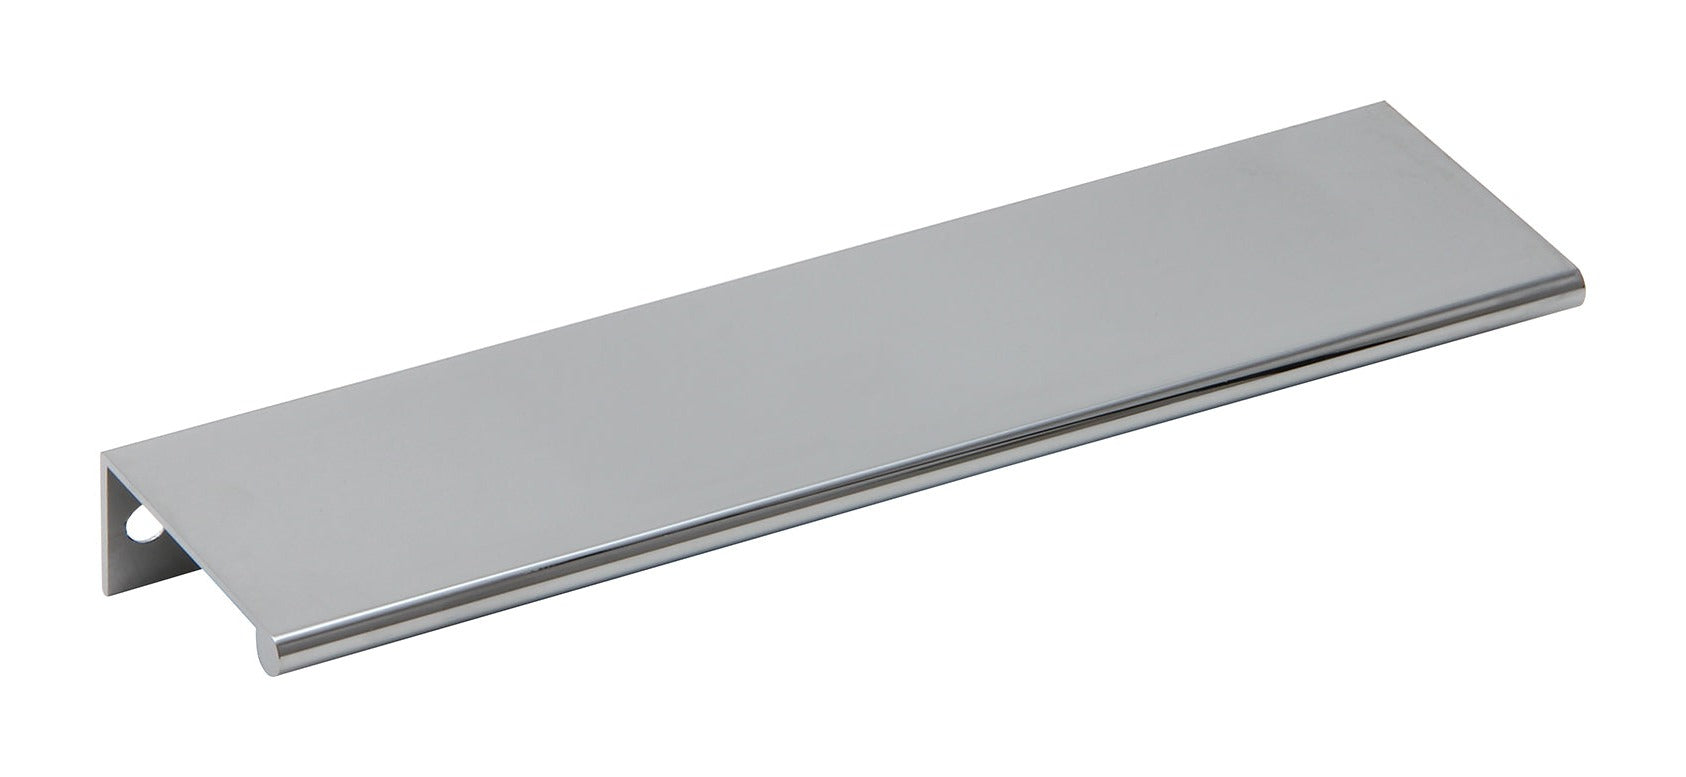 Silverline P1001 Aluminum Mount Finger Edge Tab Pull Handle in Polished Chrome Finish Various Sizes